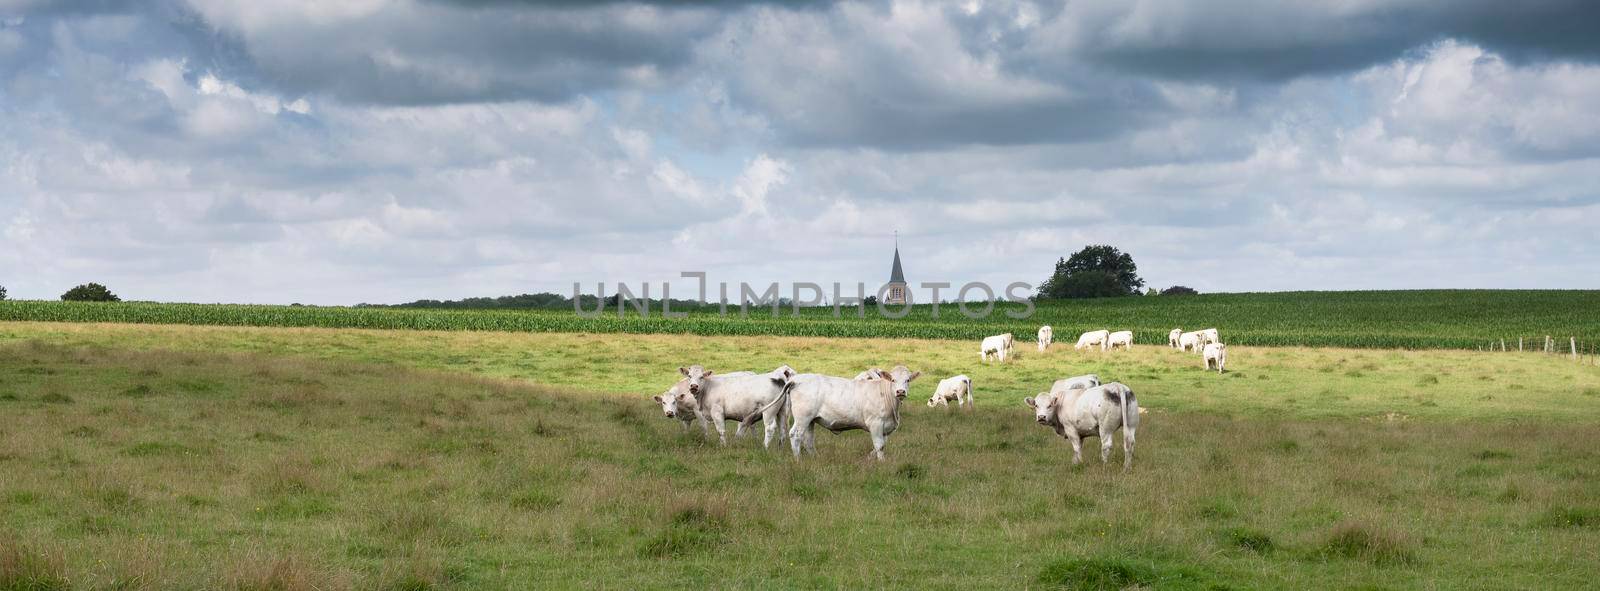 white cows in french ardennes near charleville in france by ahavelaar